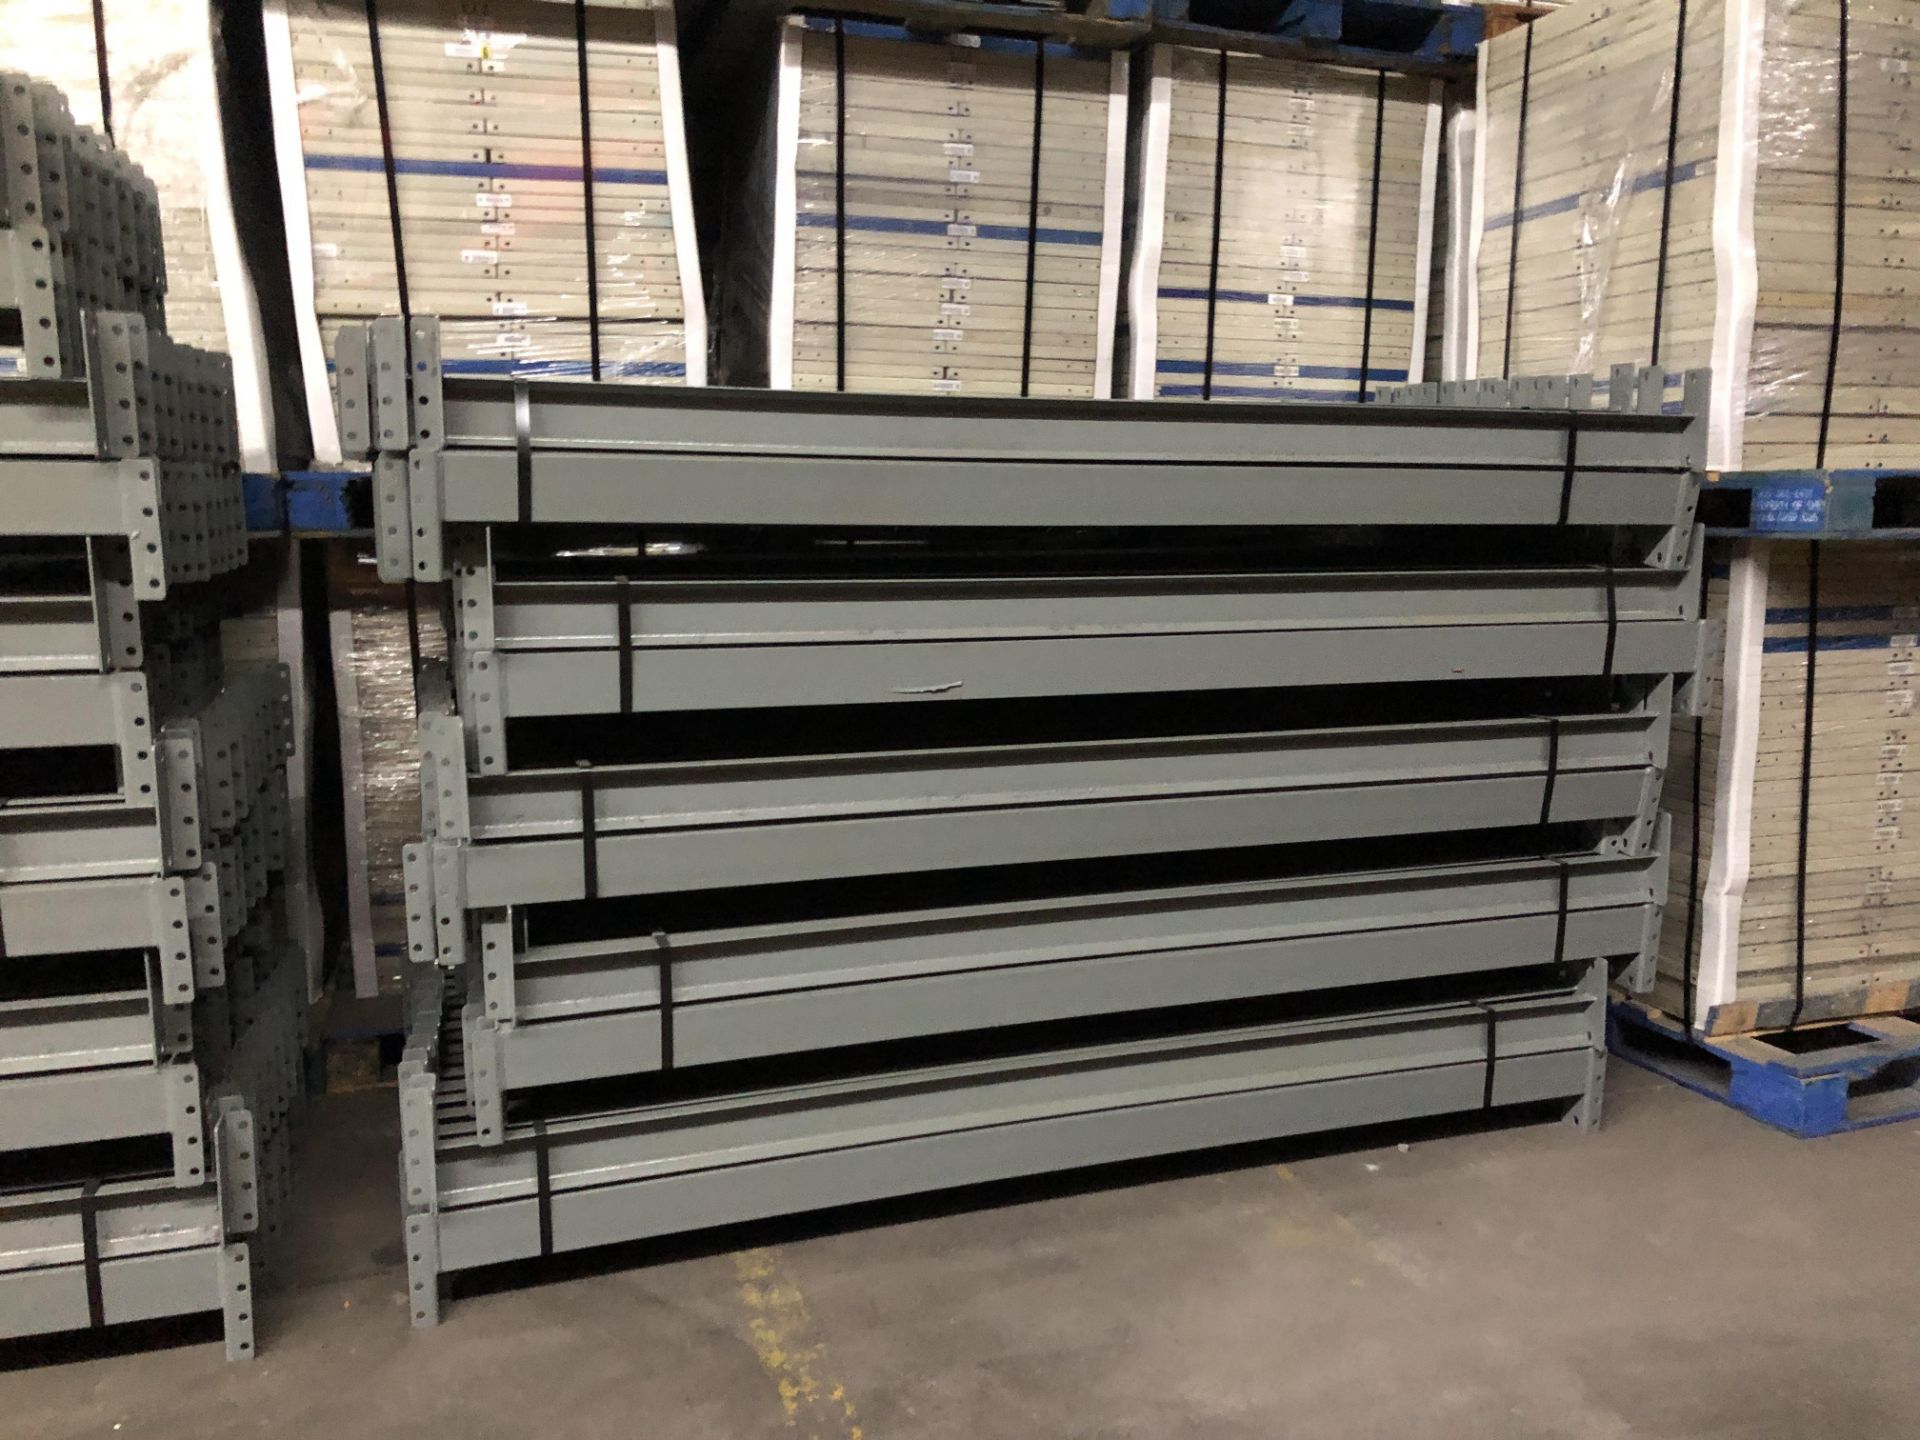 14 BAYS OF 10.5'H X 42"D X 93"L STRUCTURAL STYLE PALLET RACKS - Image 5 of 5